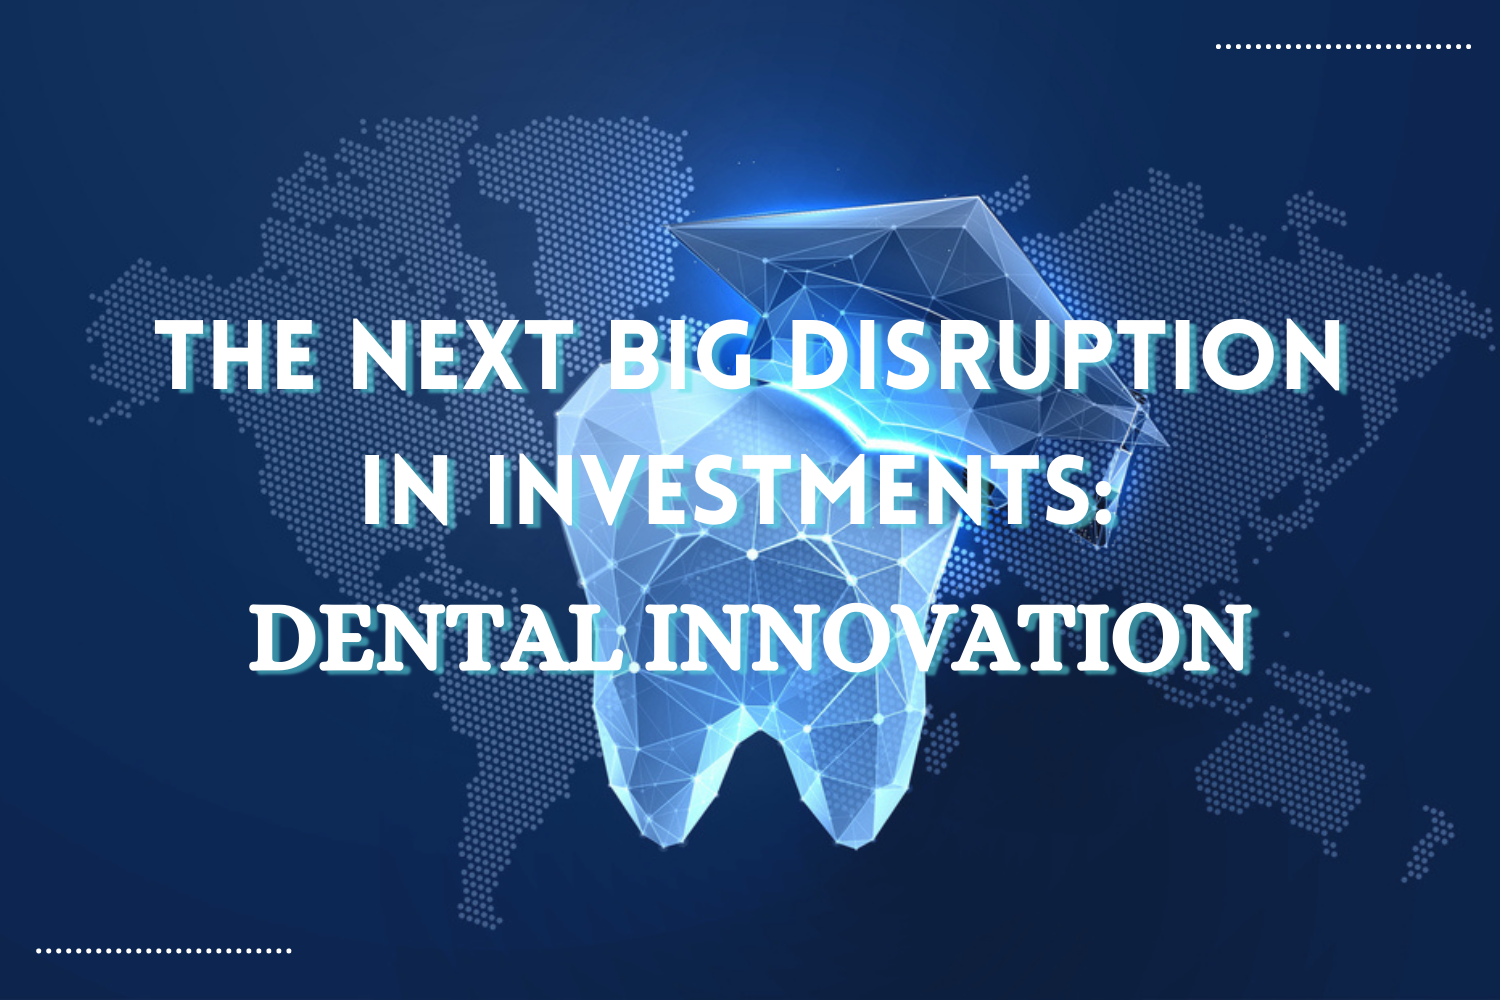 The next big disruption in investments: Dental Innovation